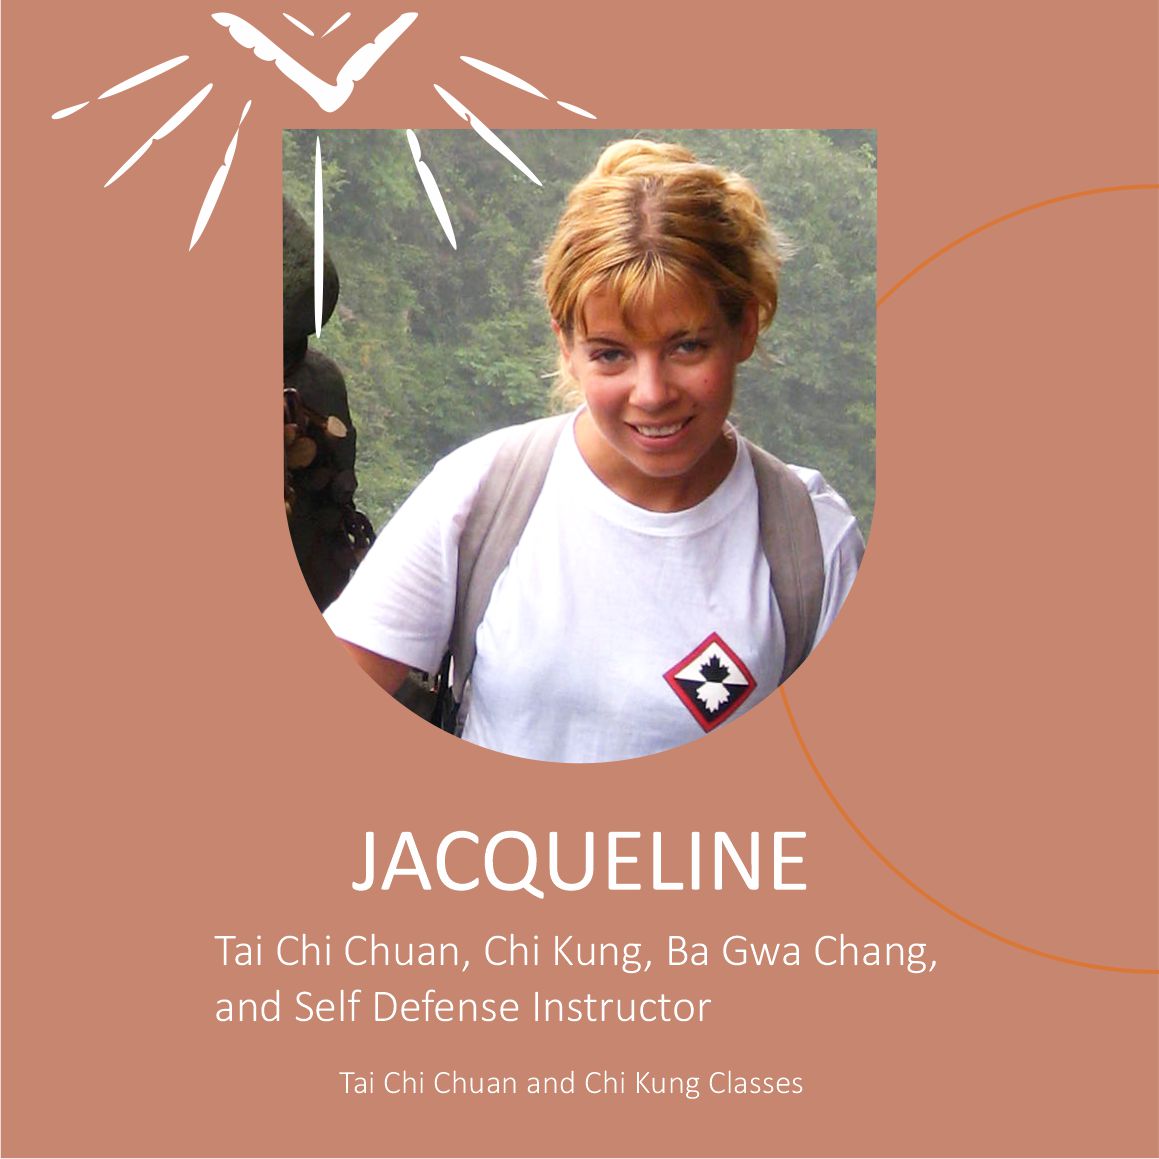 Tai Chi Chuan & Chi Kung - With Jacqueline - Tuesday evenings